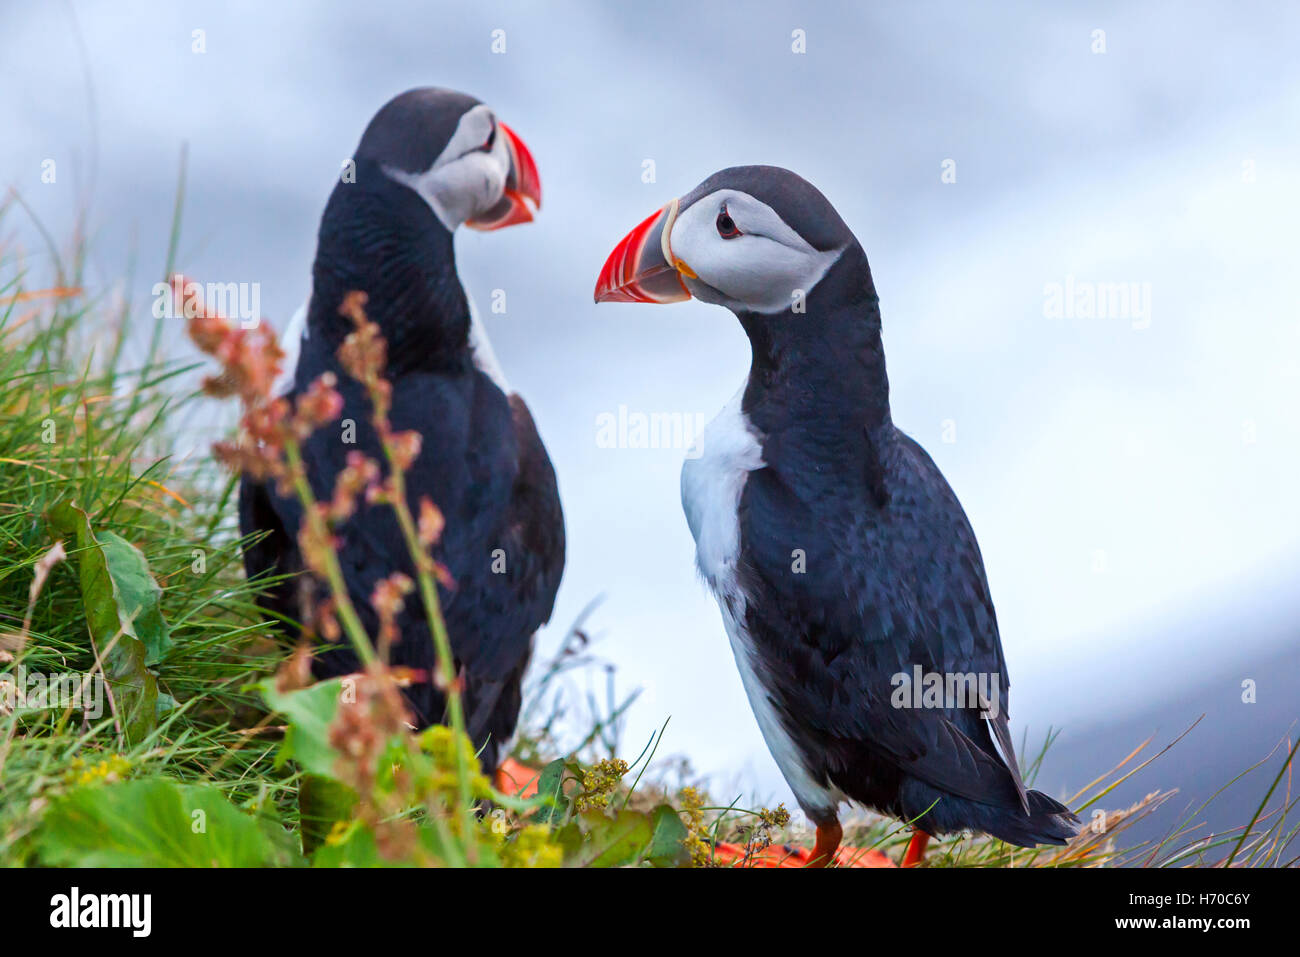 A group of Puffins (Puffin Birds) in Iceland. Stock Photo